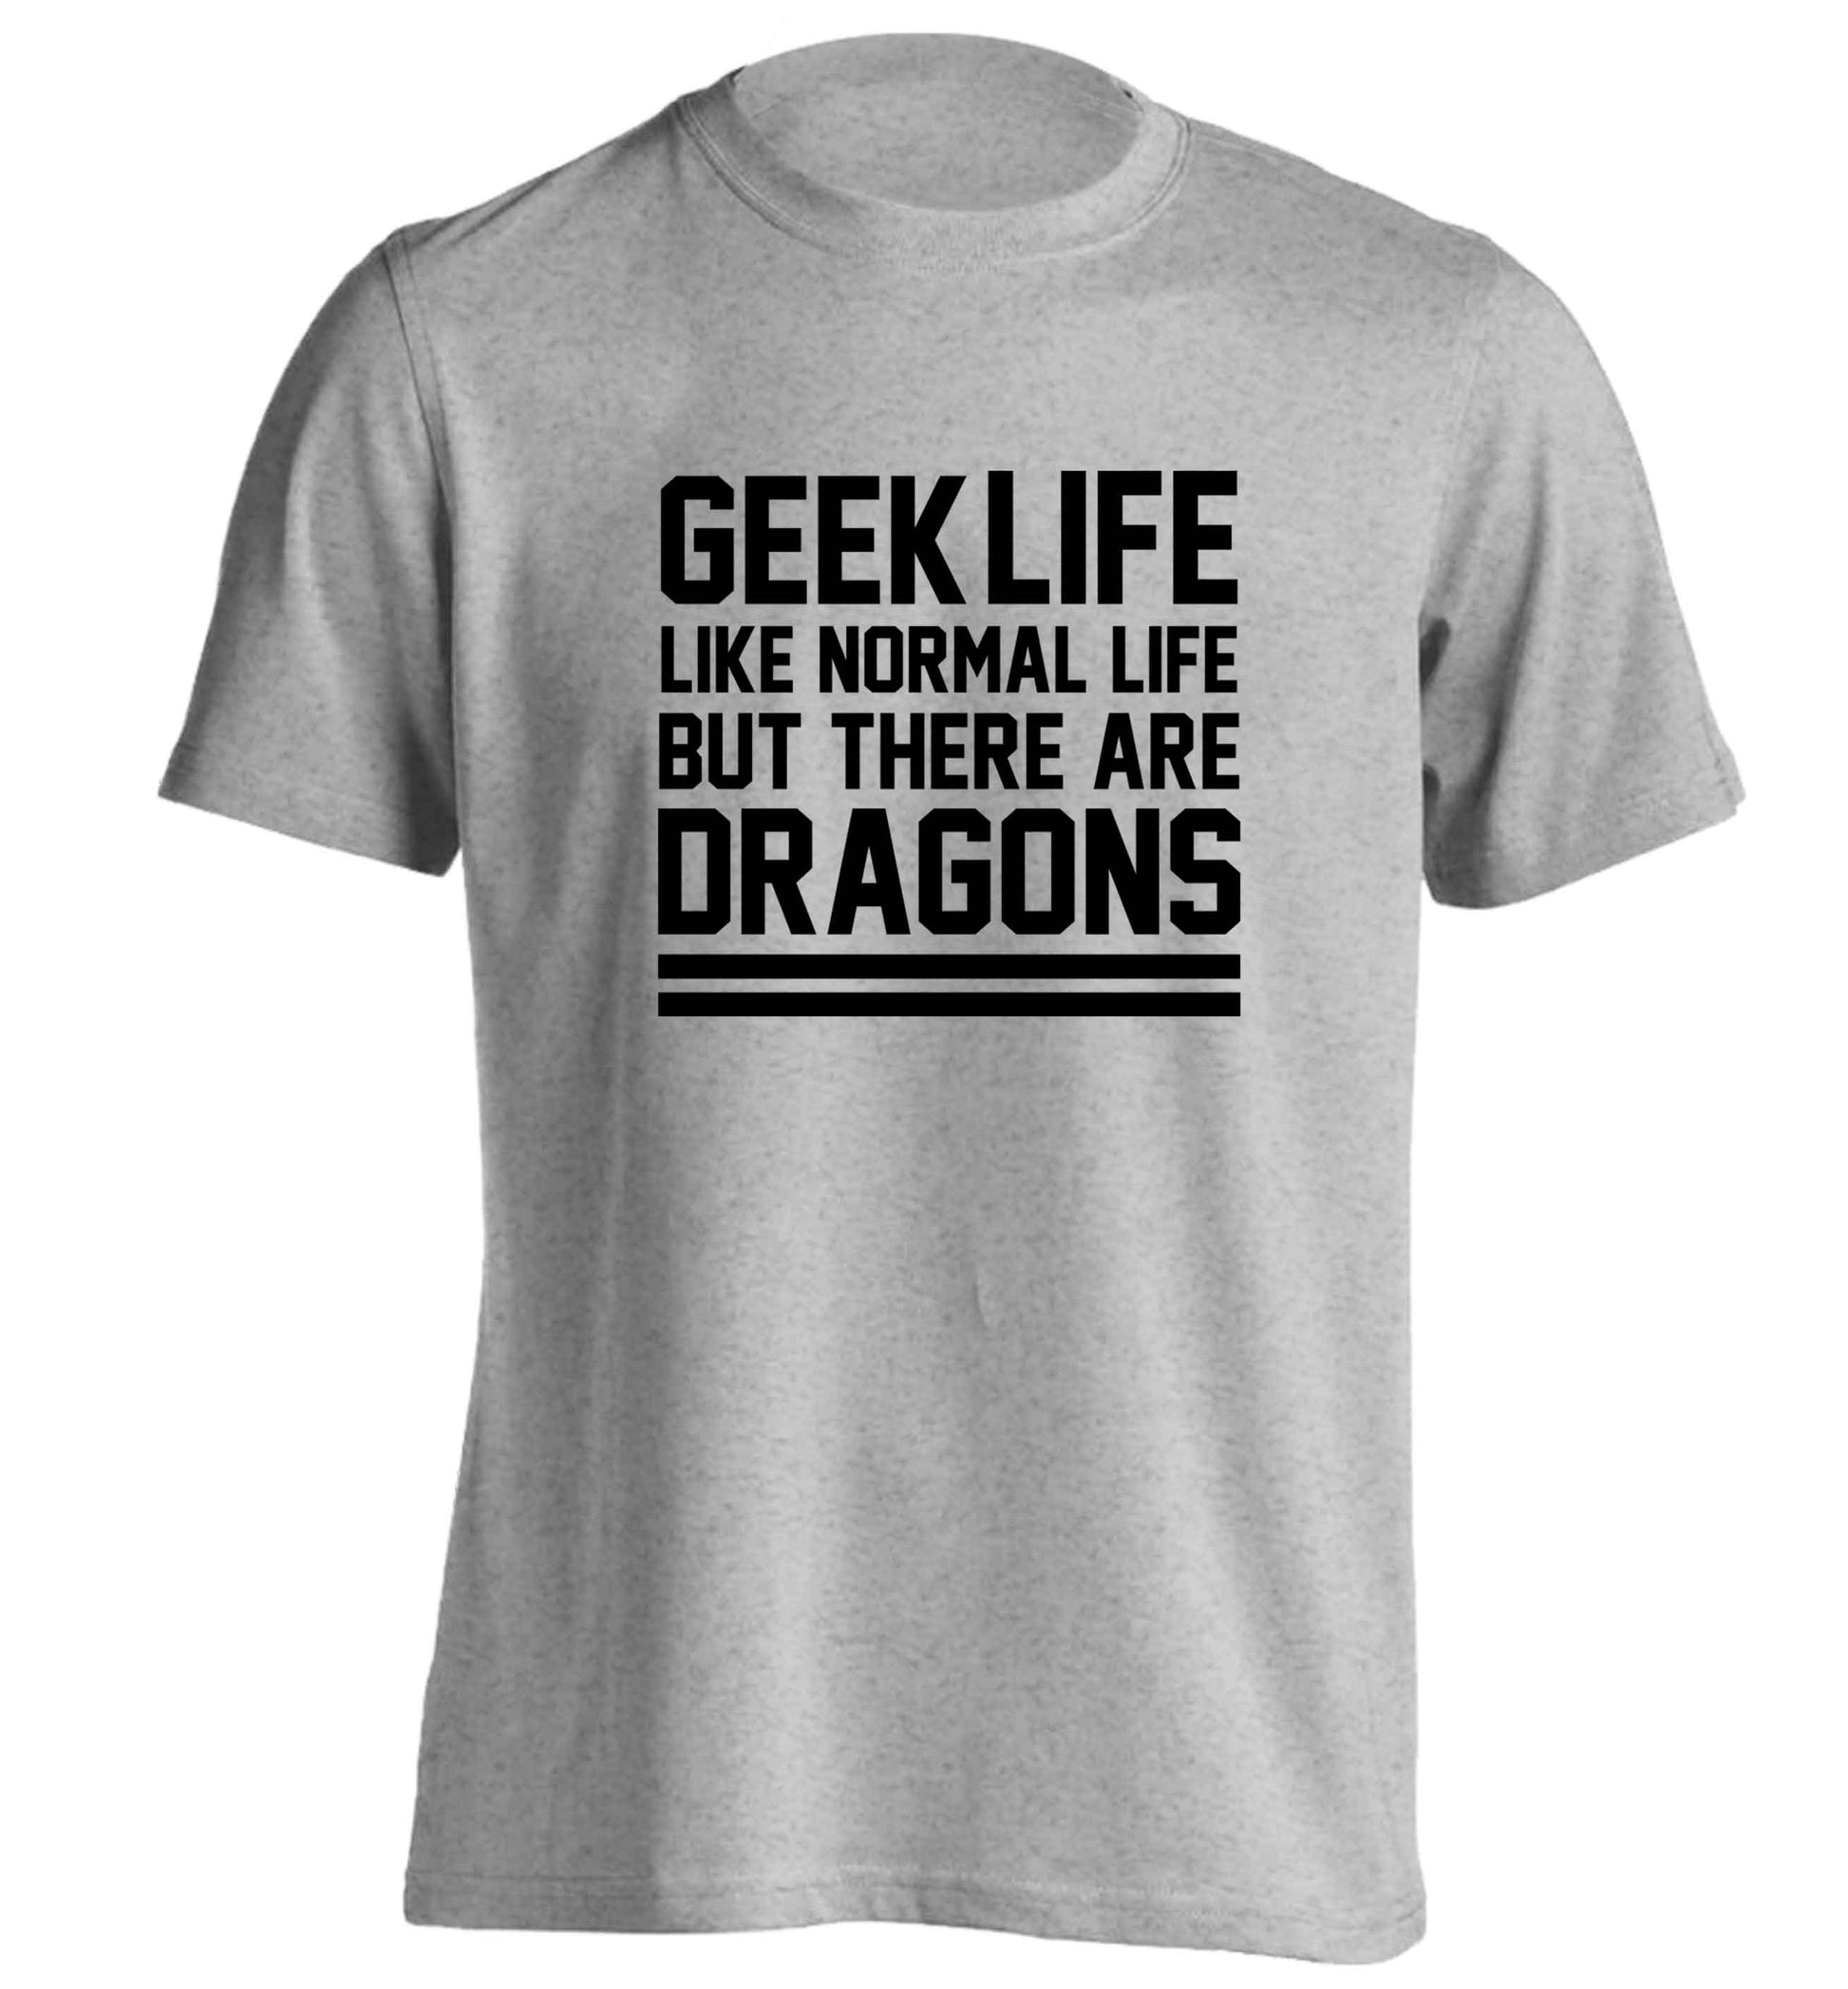 Geek life like normal life but there are dragons adults unisex grey Tshirt 2XL